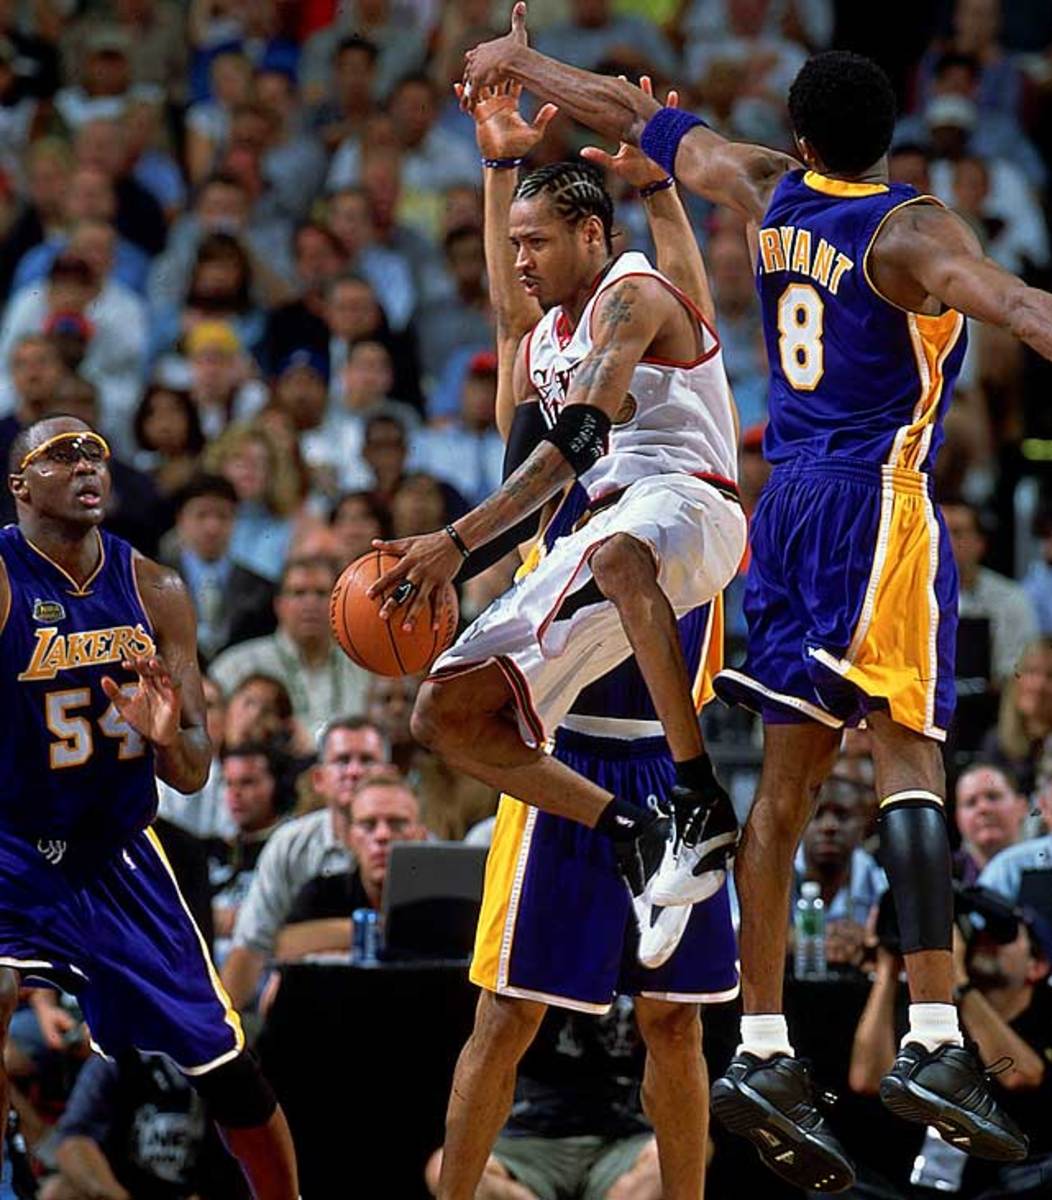 Allen Iverson, Kobe Bryant and Horace Grant